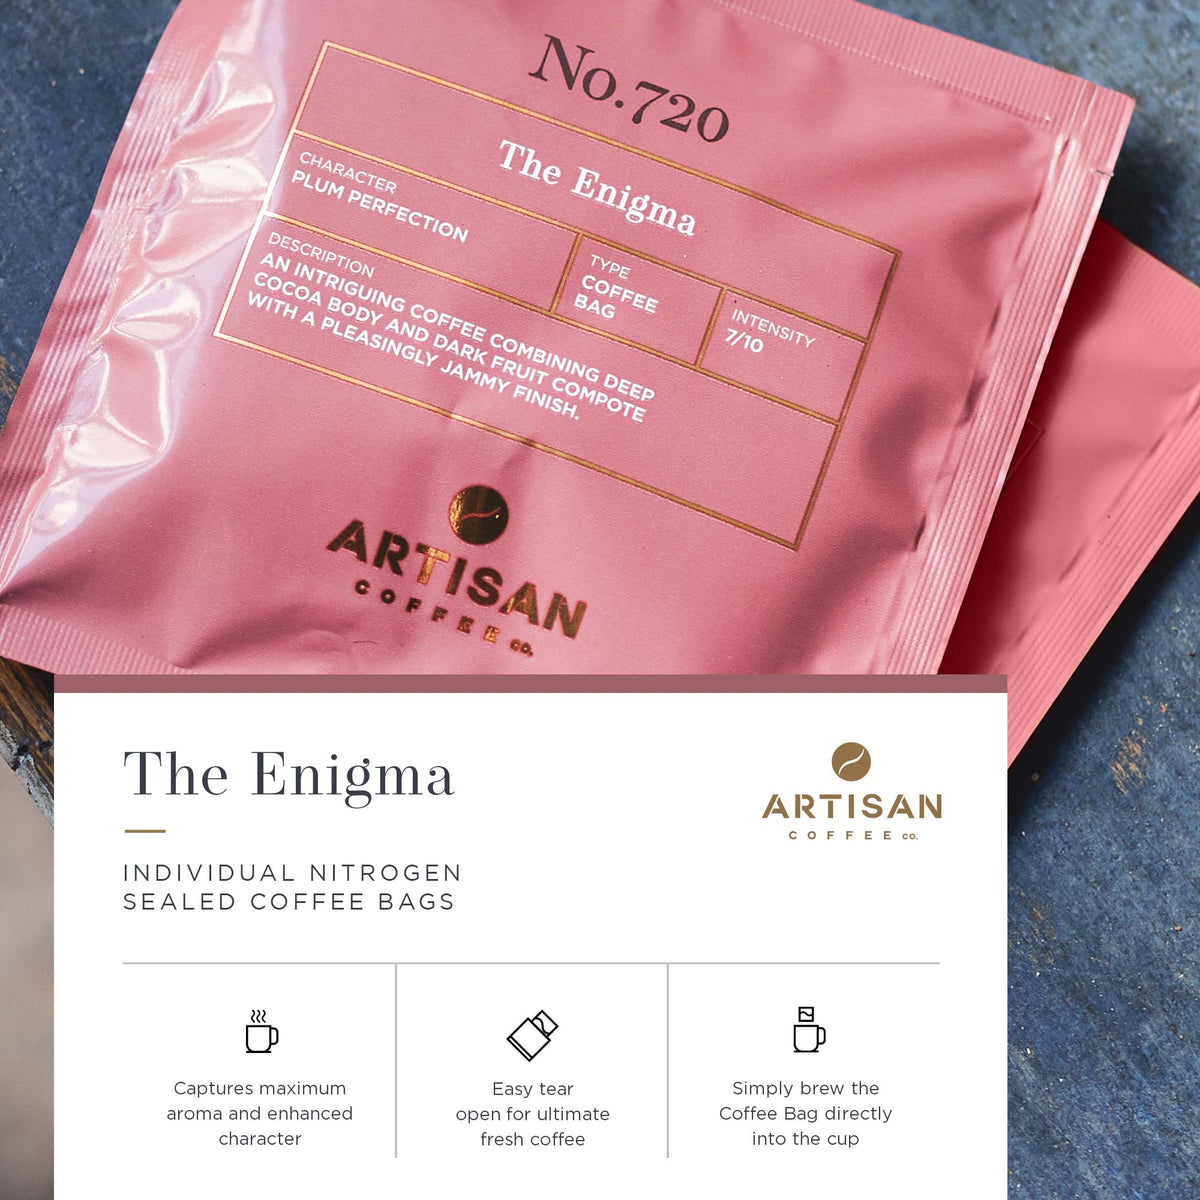 Artisan Coffee Co The Enigma Coffee bags Infographic Nitrogen Sealed